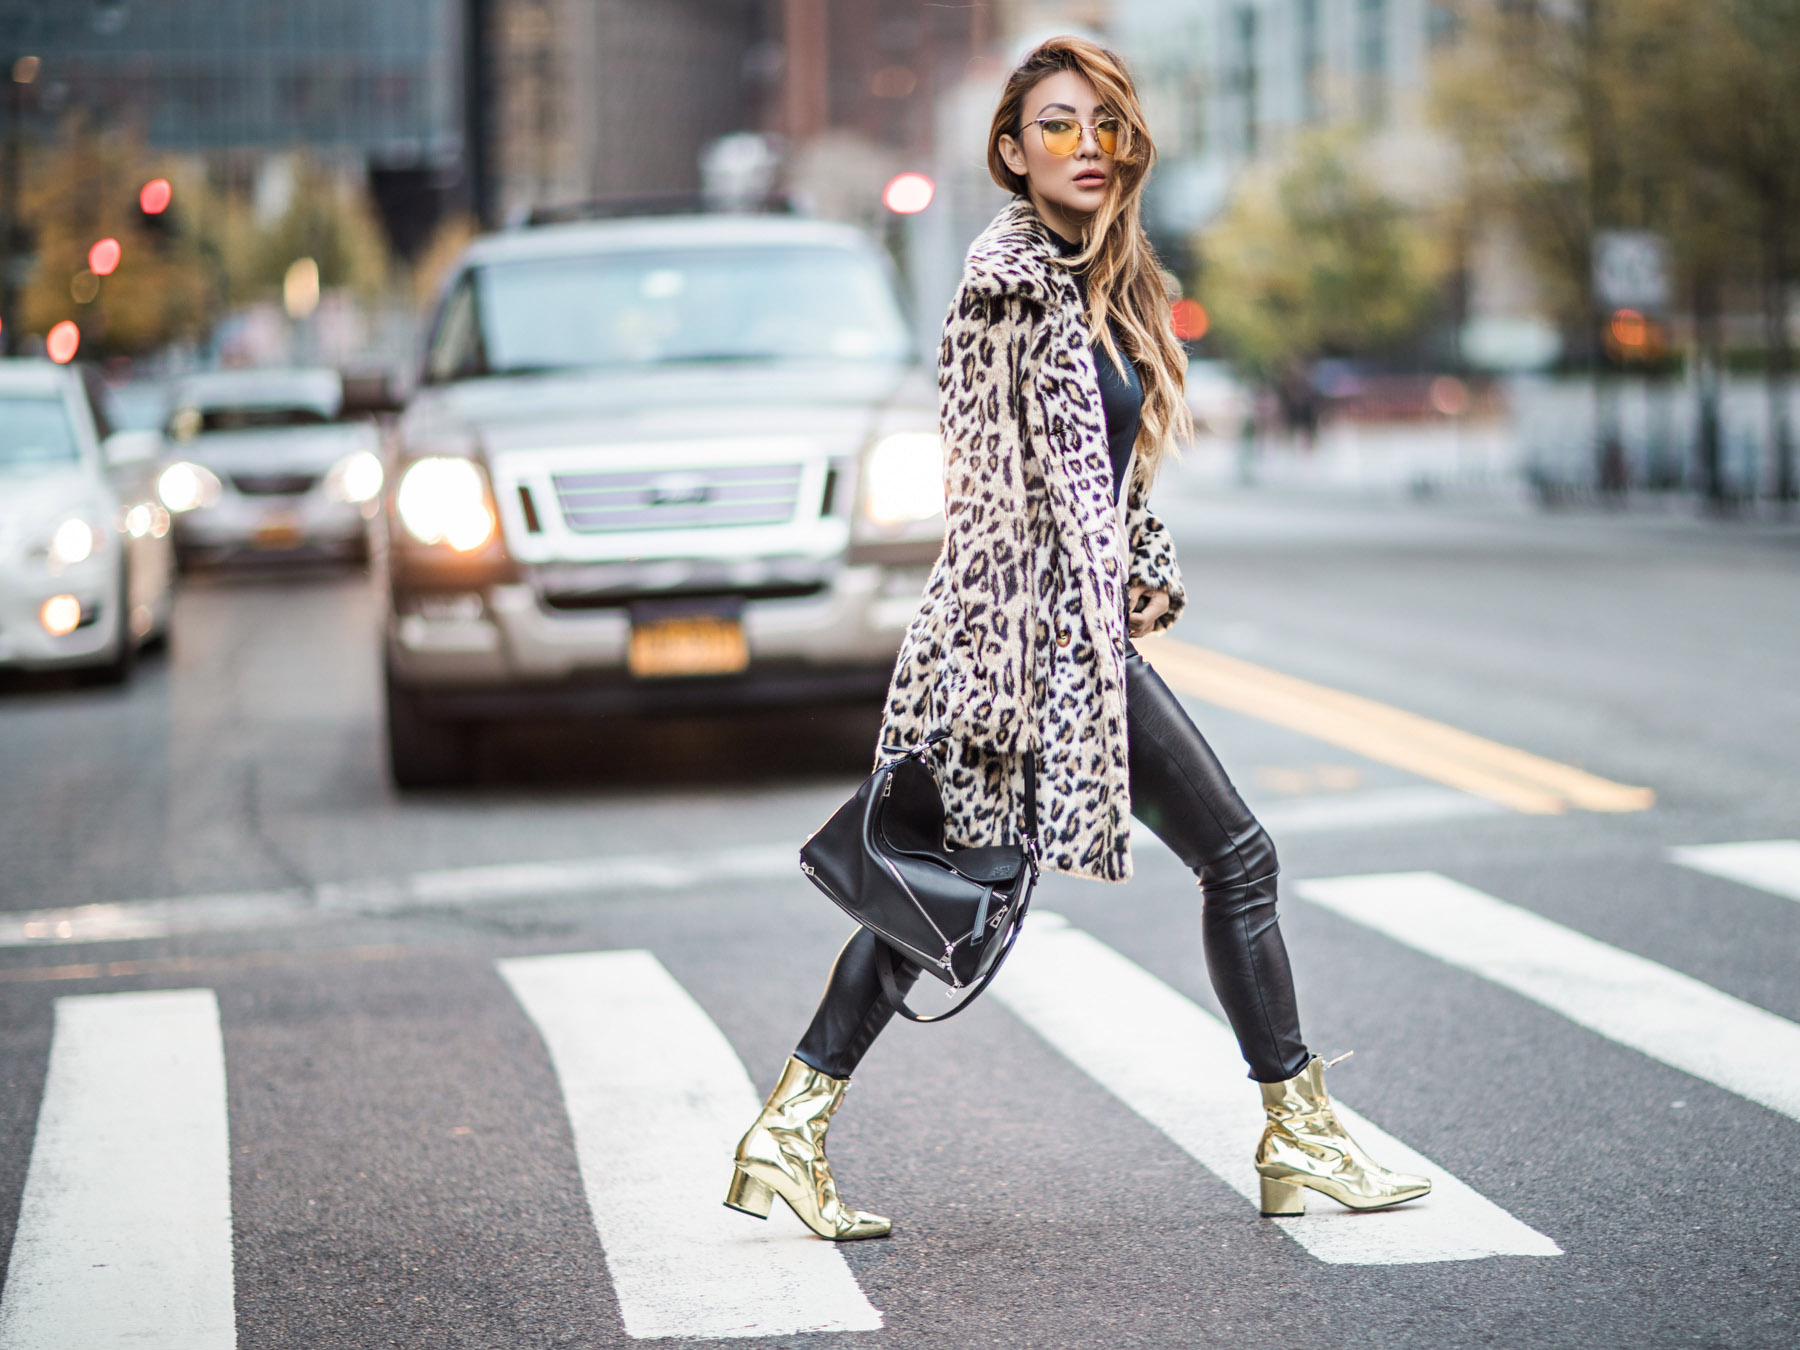 Essential Photography Tips for New Bloggers - Leopard coat, Leather Pants, and Gold Boots // Notjessfashion.com // yellow aviator sunglasses, winter style, winter outfit, layered outfit, street style fashion, fashion blogger street style, new york fashion blogger, faux fur leopard coat, faux fur coat, asian blogger, jessica wang, edgy style